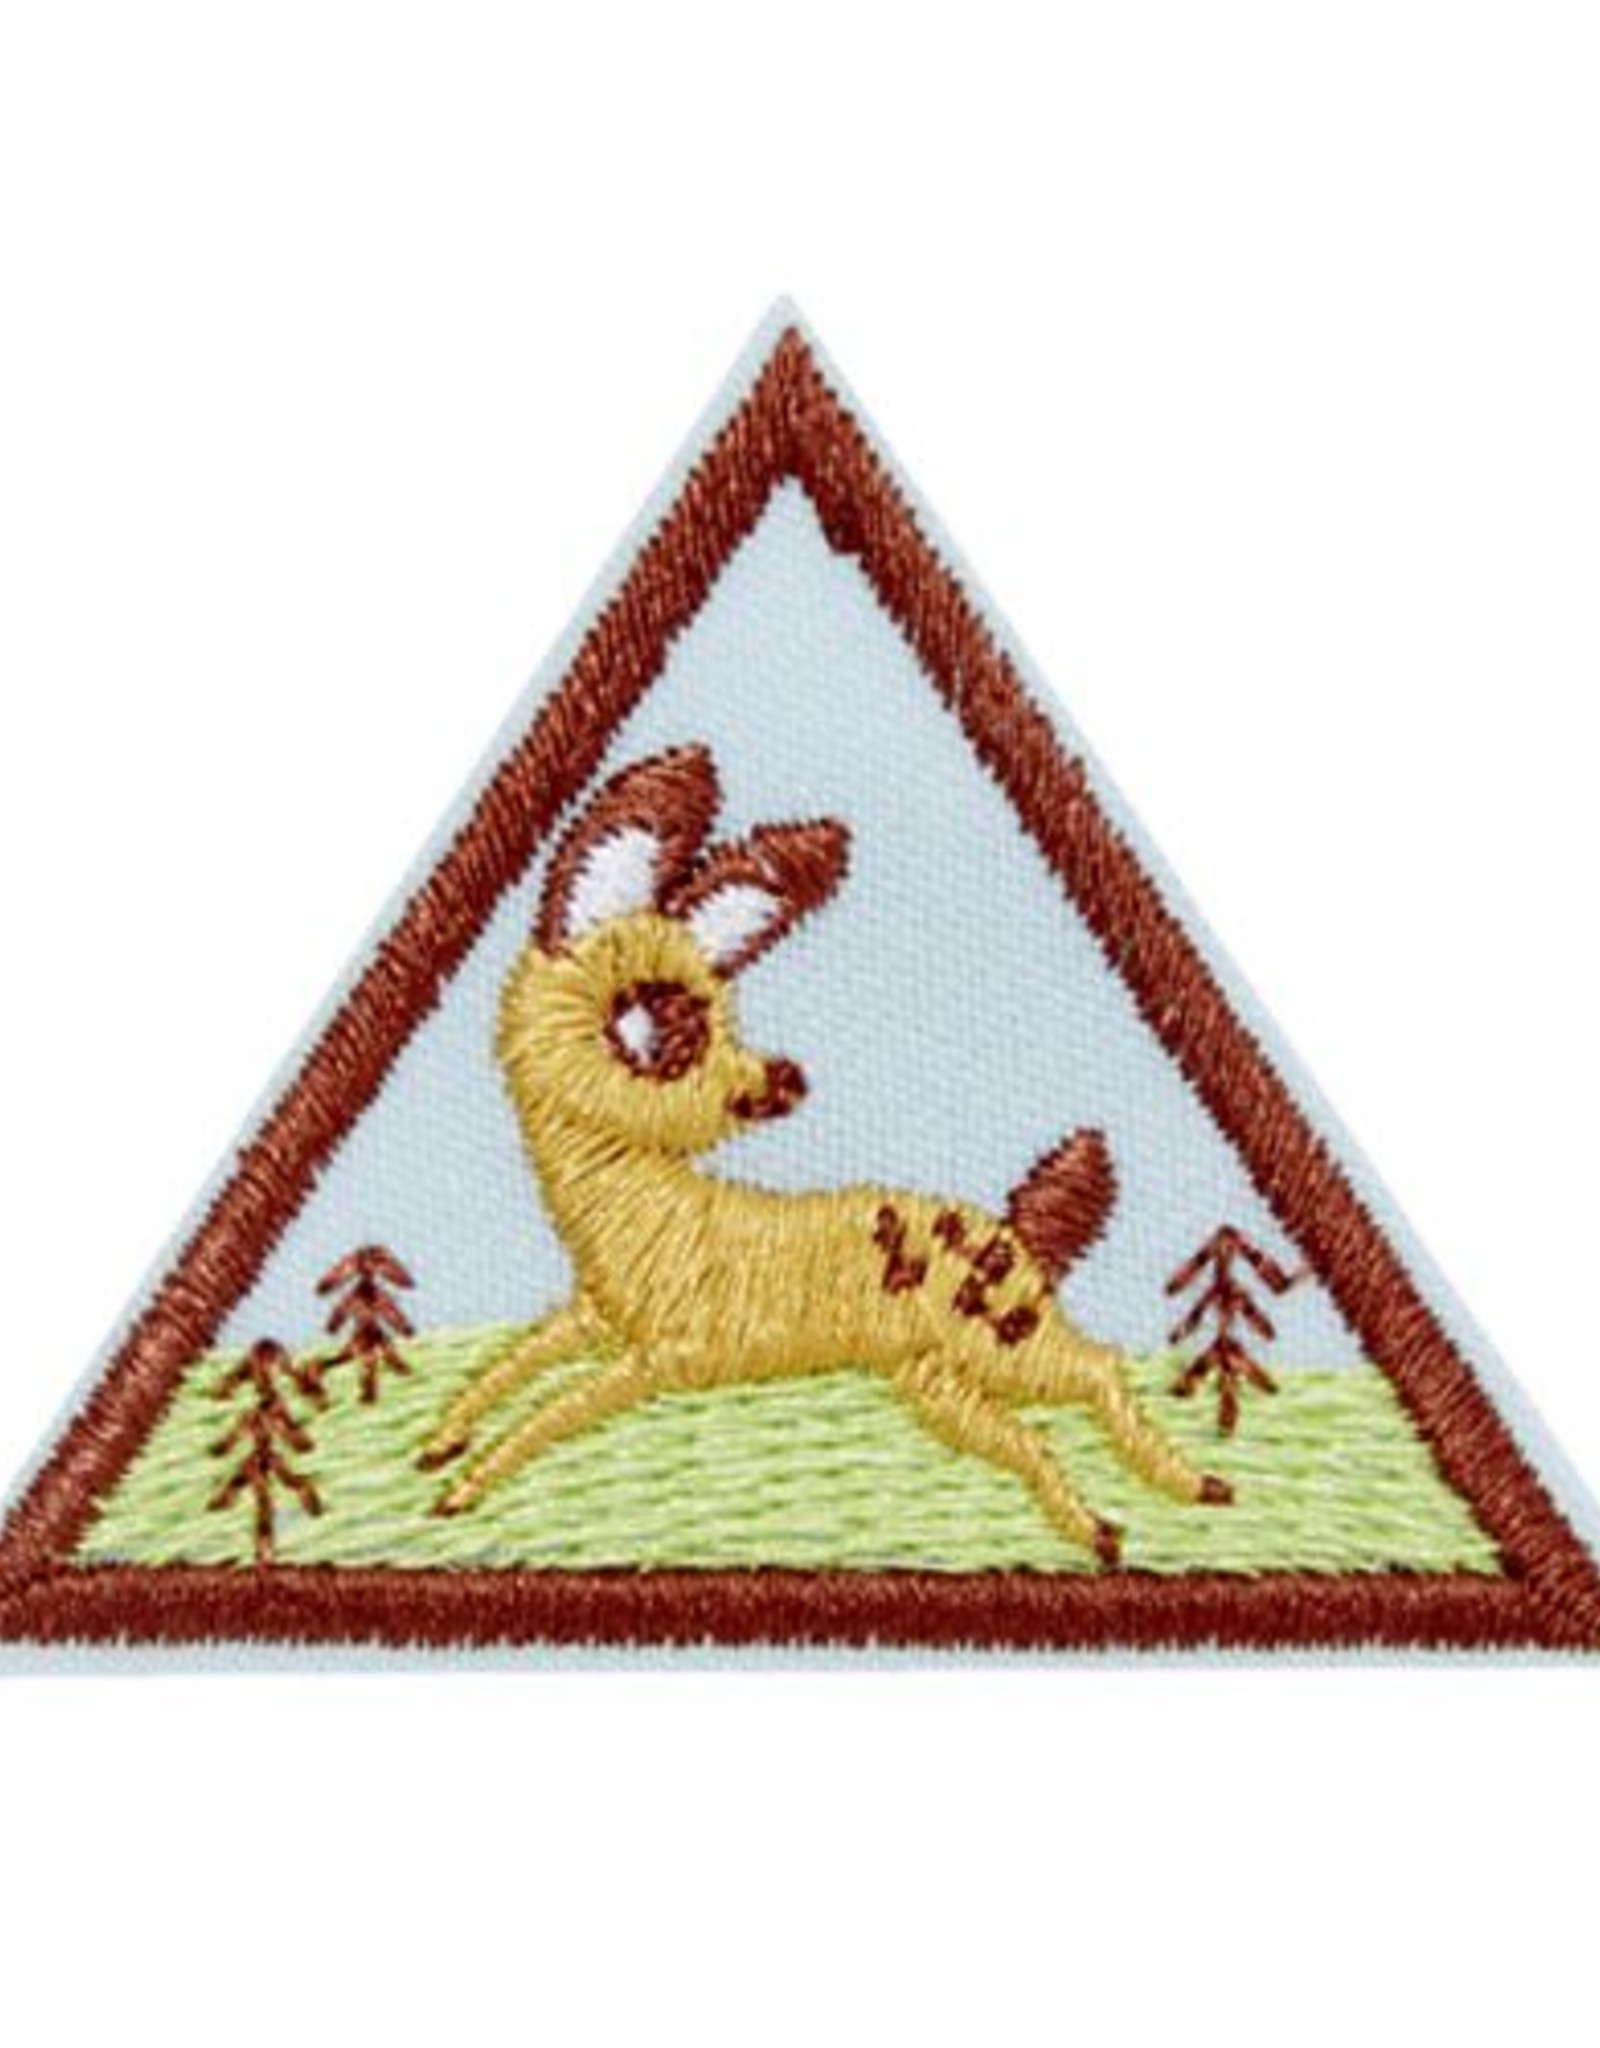 GIRL SCOUTS OF THE USA Brownie Eco Friend Badge